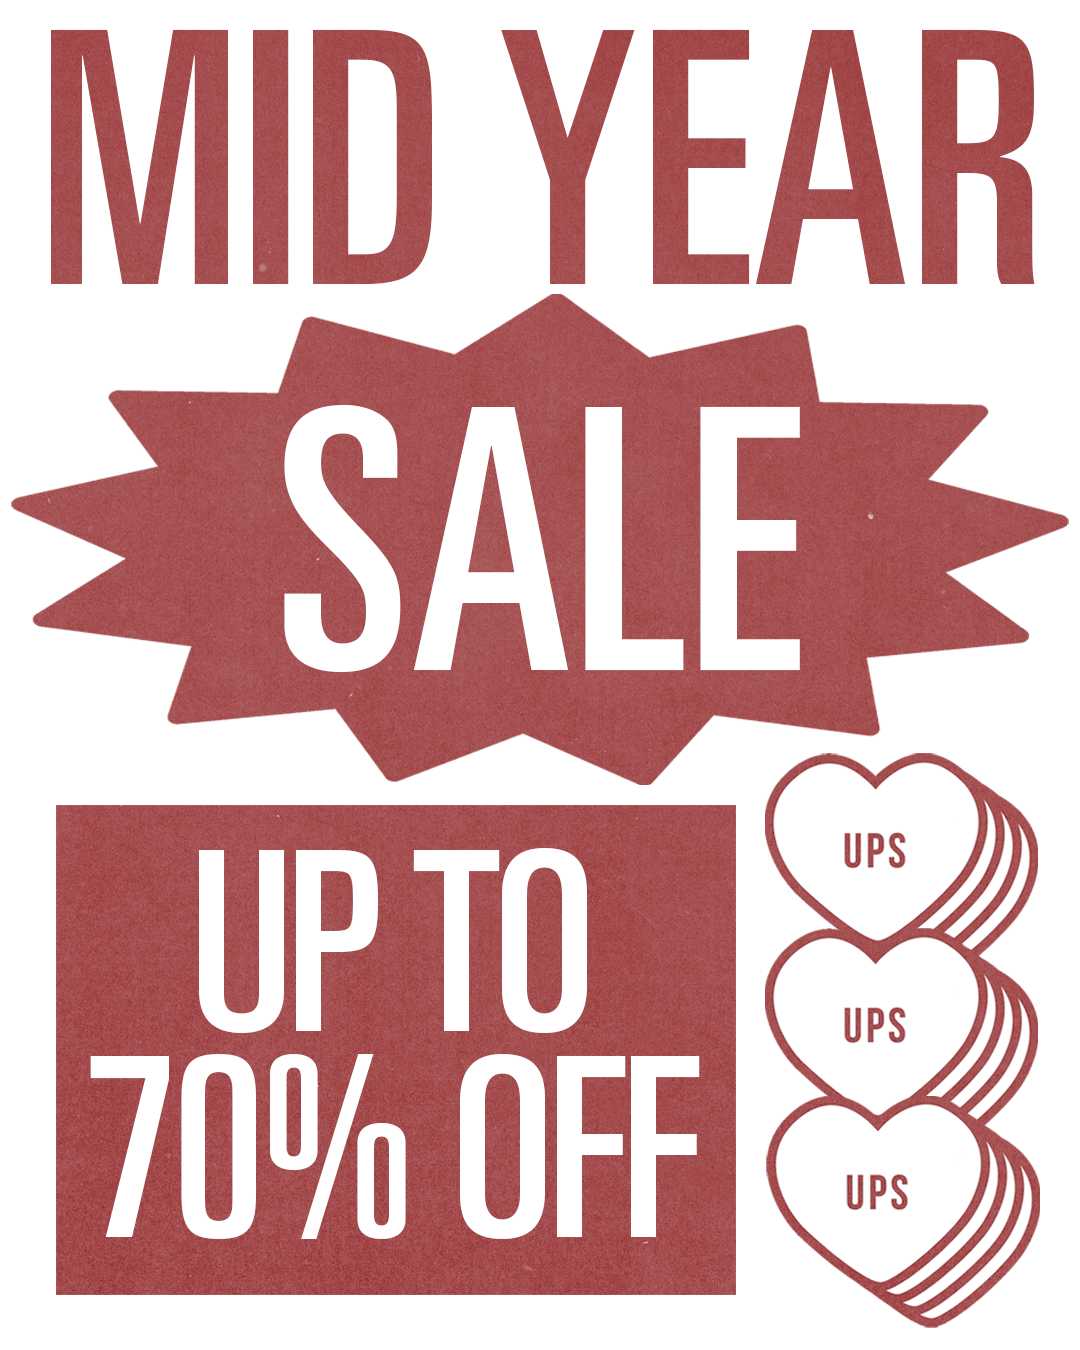 U.P.S. skate shop mid year sale poster